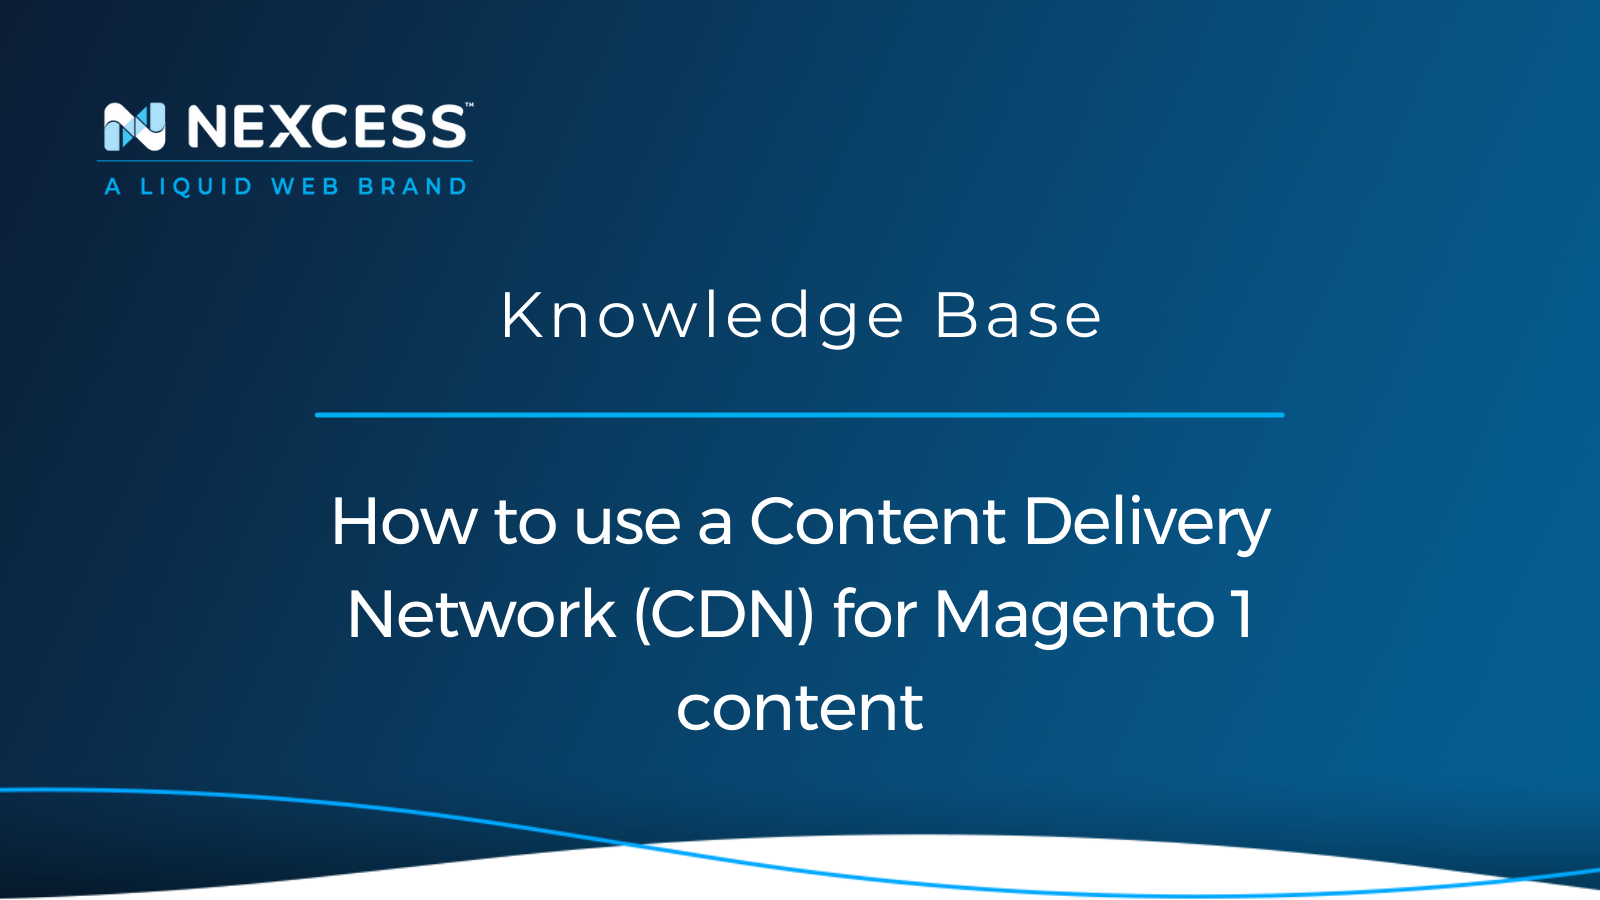 How to use a Content Delivery Network (CDN) for Magento 1 content